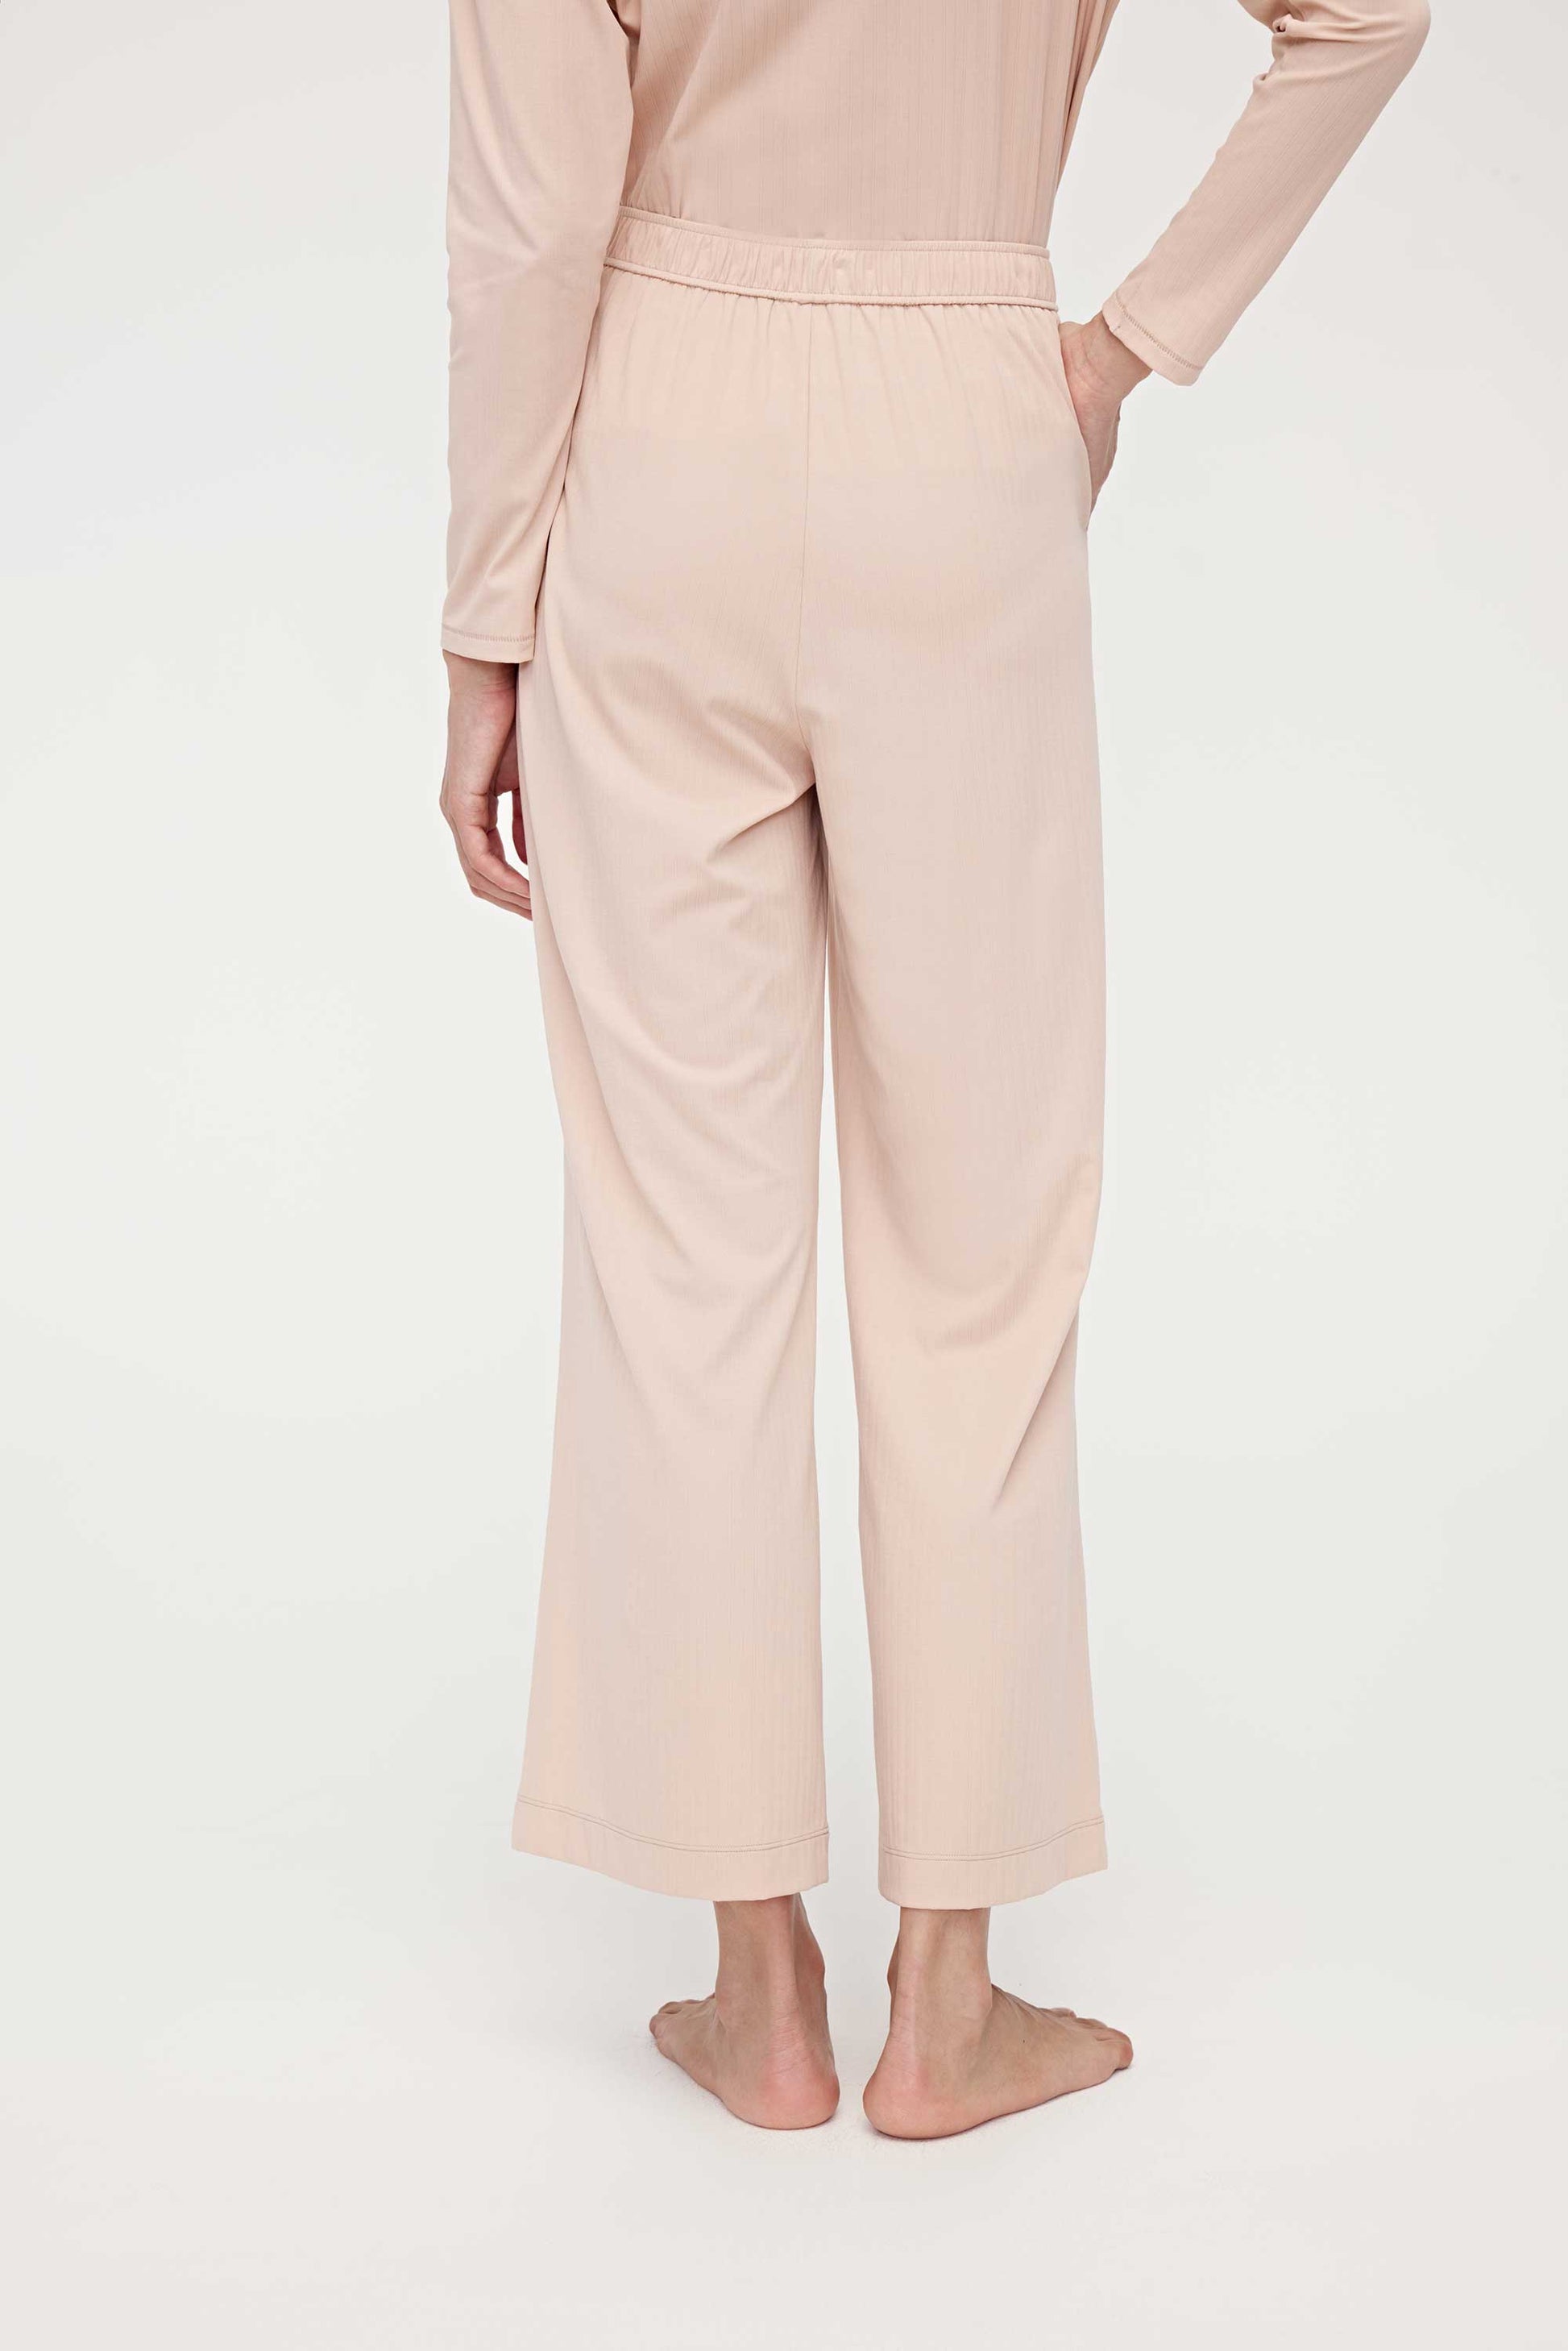 back of woman in pink lounge pants